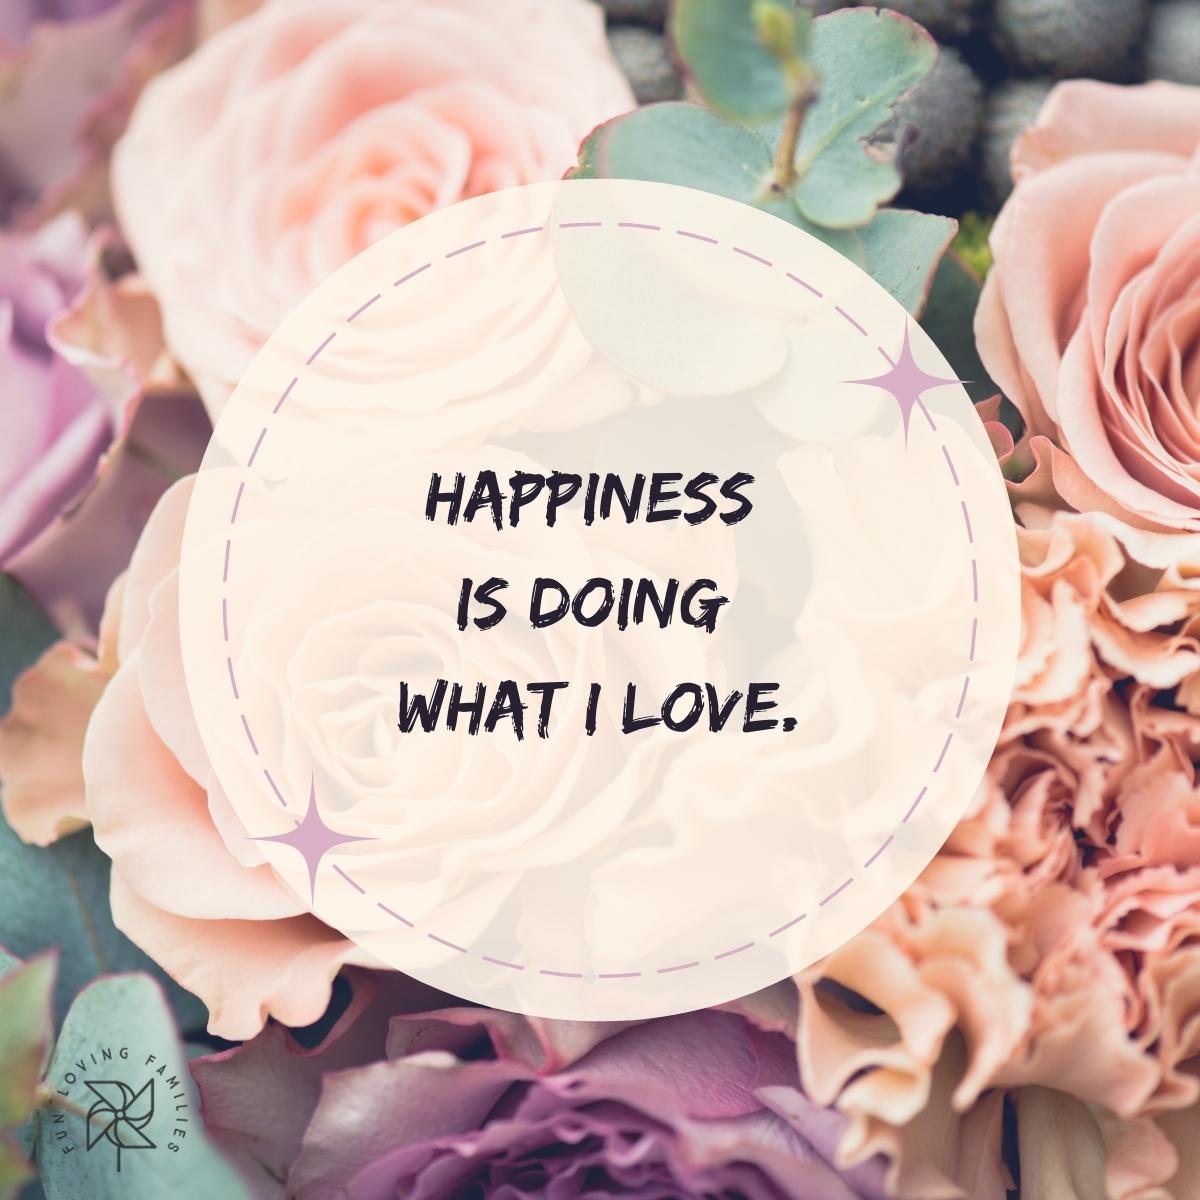 Happiness is doing what I love affirmation